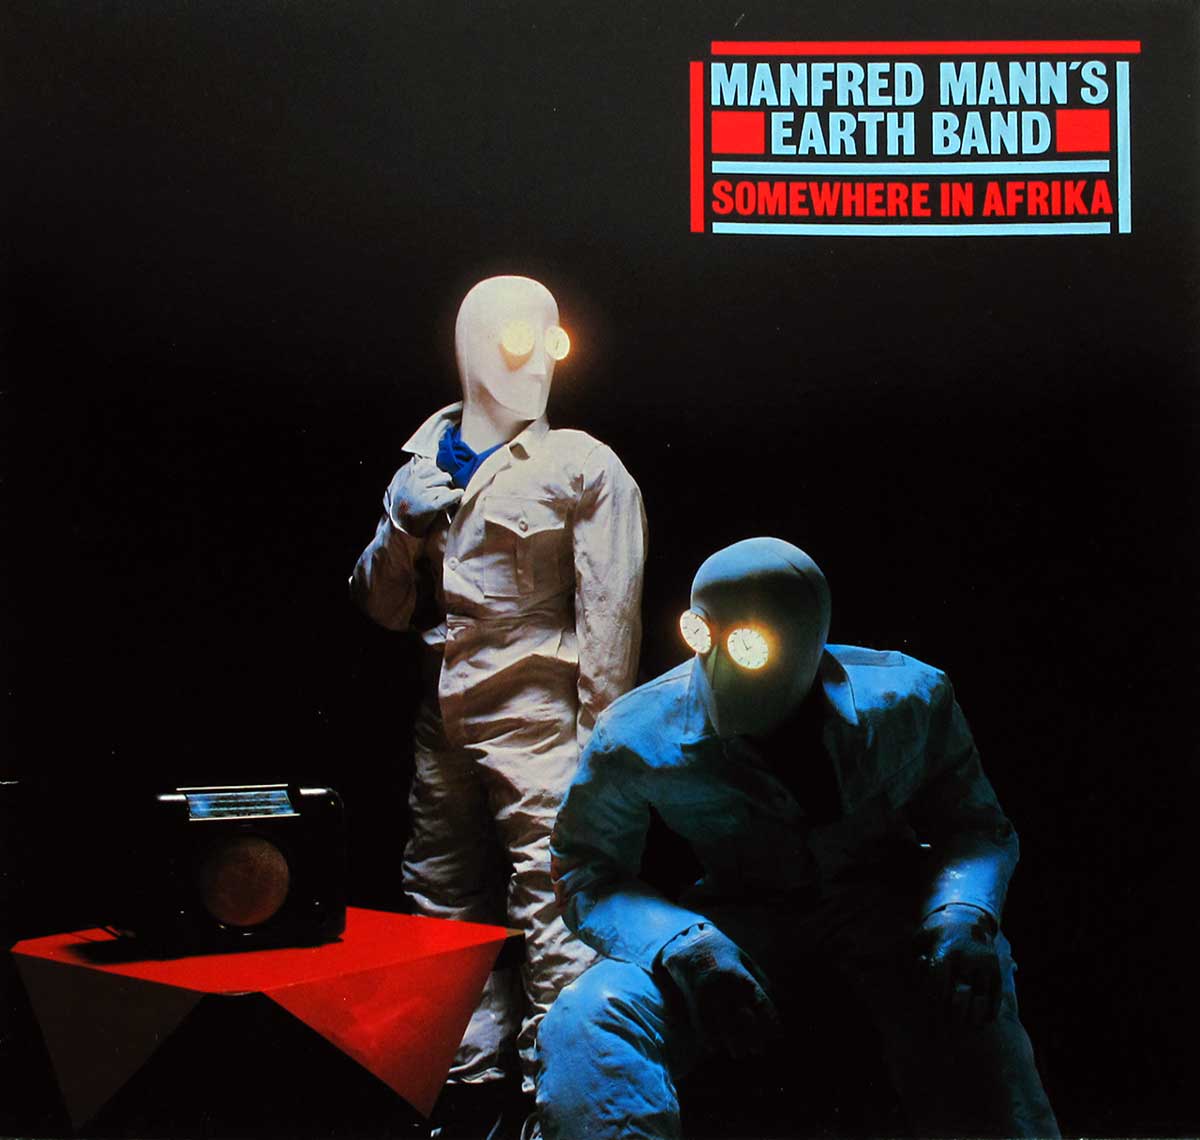 large album front cover photo of: MANFRED MANN'S EARTH BAND  SOMEWHERE IN AFRIKA  12" Vinyl LP Album 